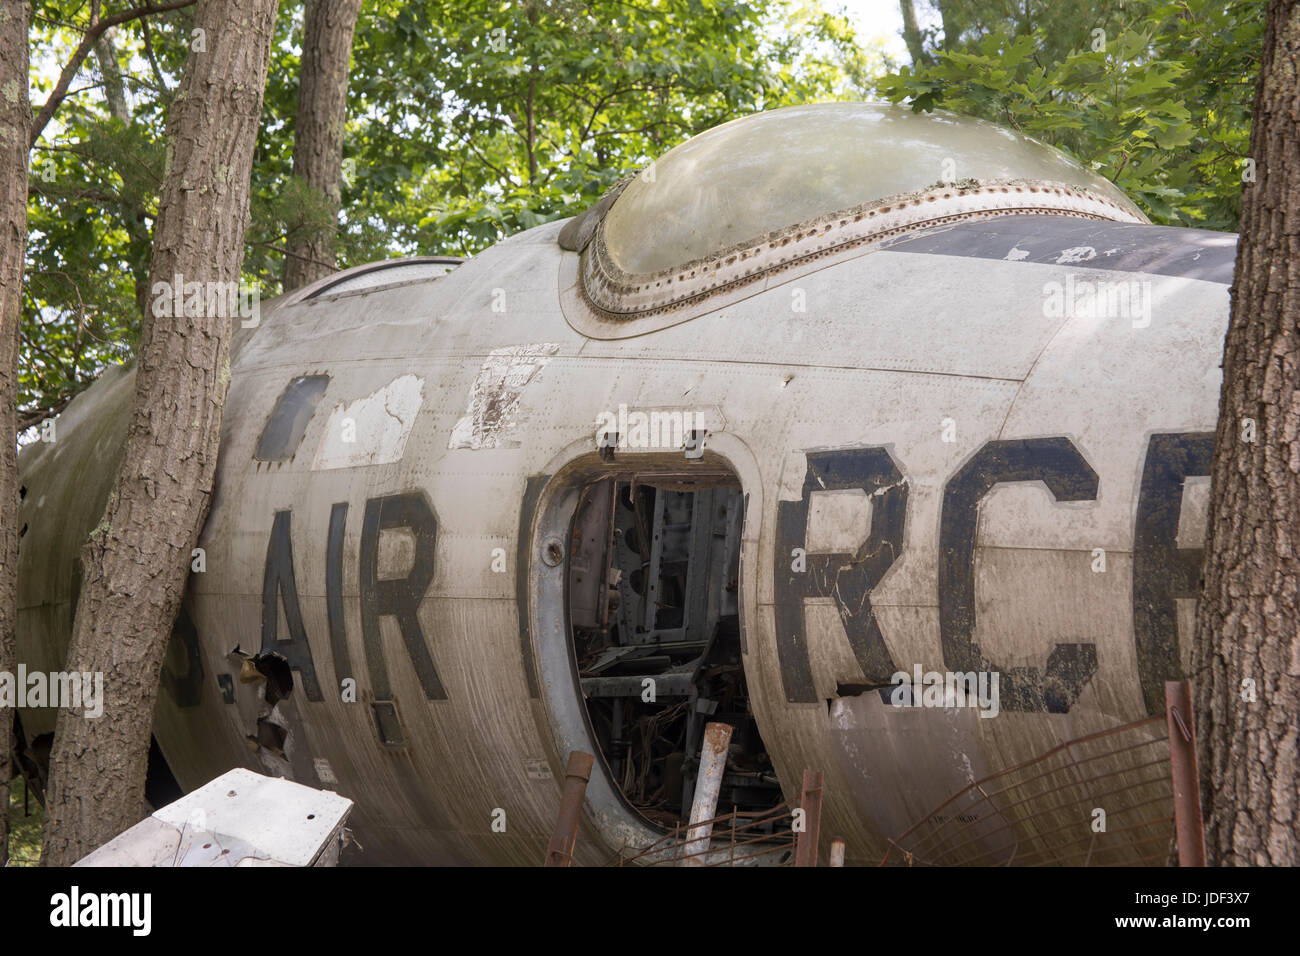 Nose cone of wrecked US Air Force fighter jet in trees of junkyard. Stock Photo